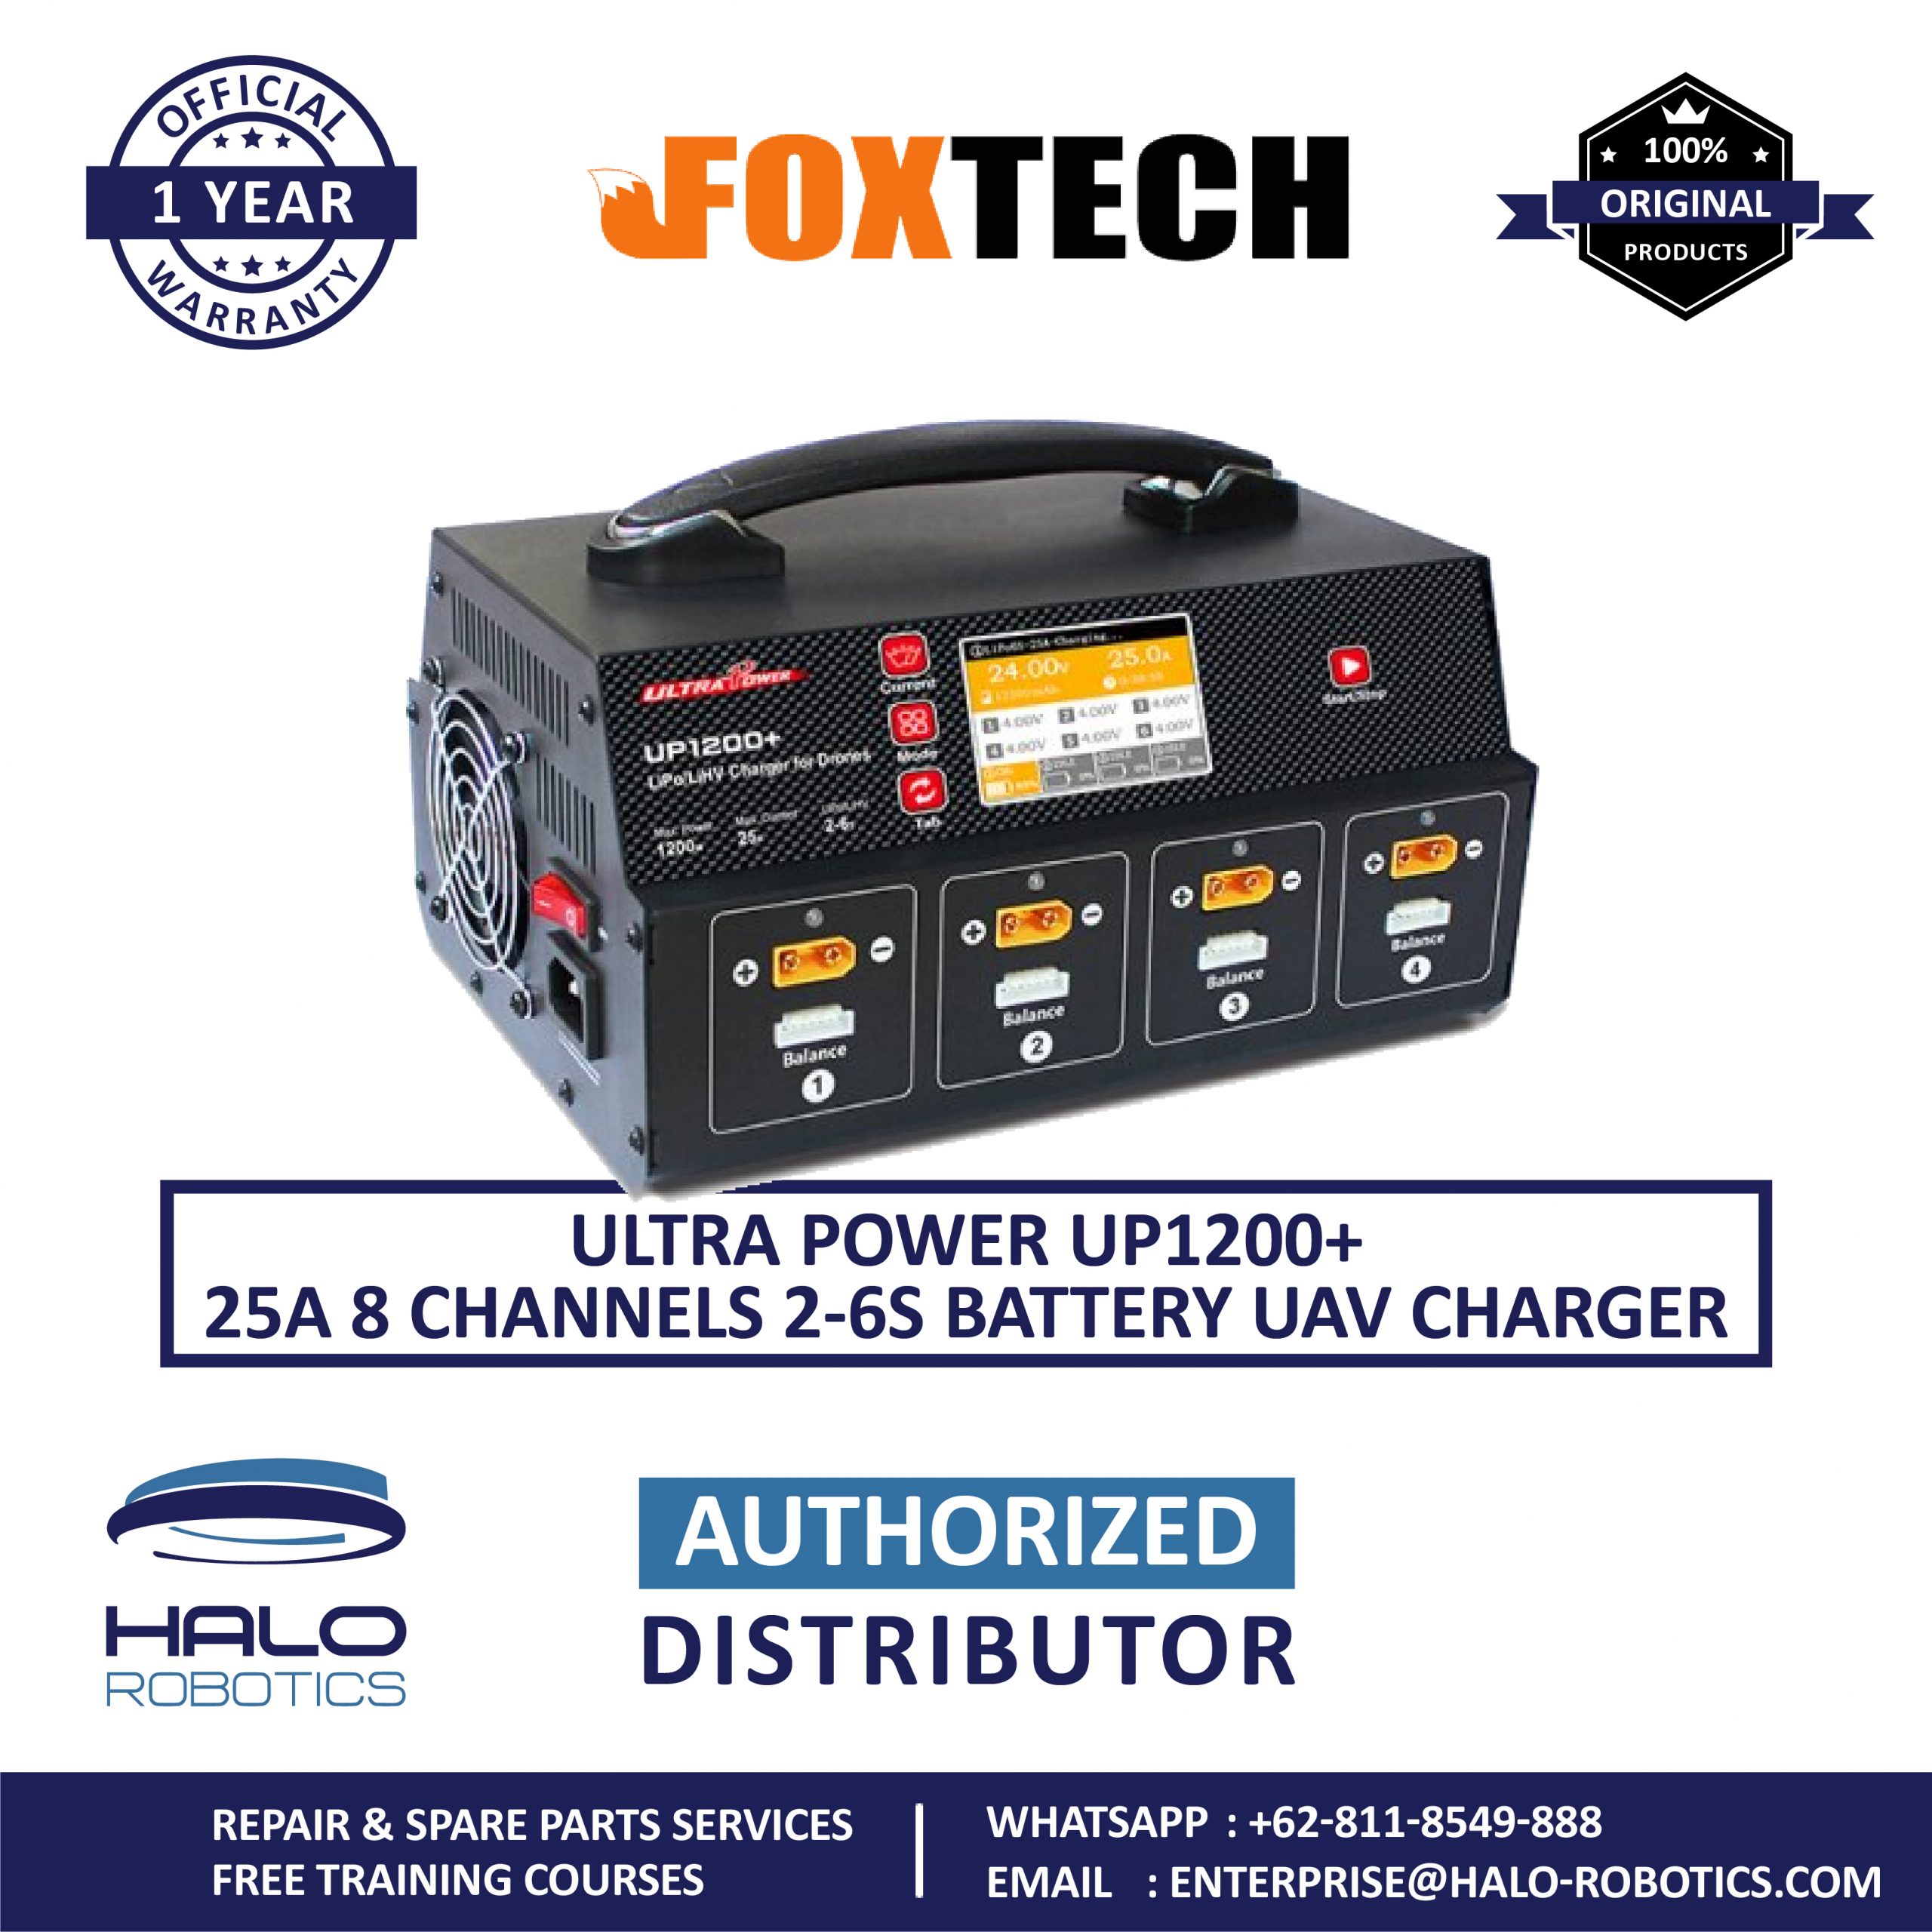 Ultra Power UP1200+ 25A 8 Channels 2-6S Battery UAV Charger - Halo